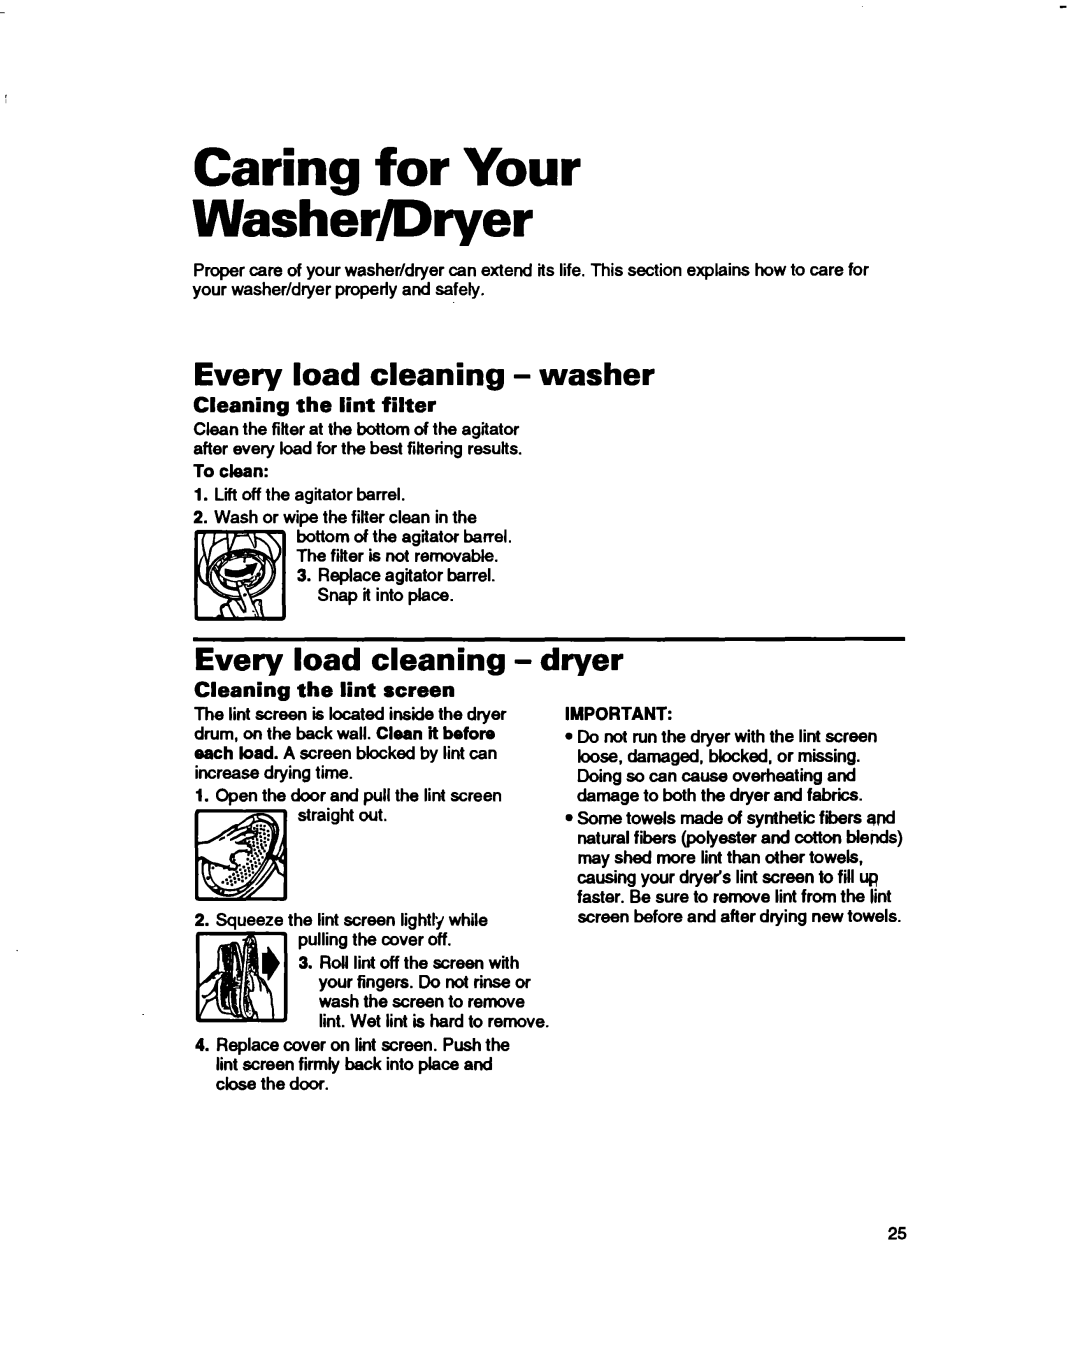 Whirlpool 3396314 warranty Caring for Your Washer/Dryer, Every load cleaning - washer, Every load cleaning - dryer 